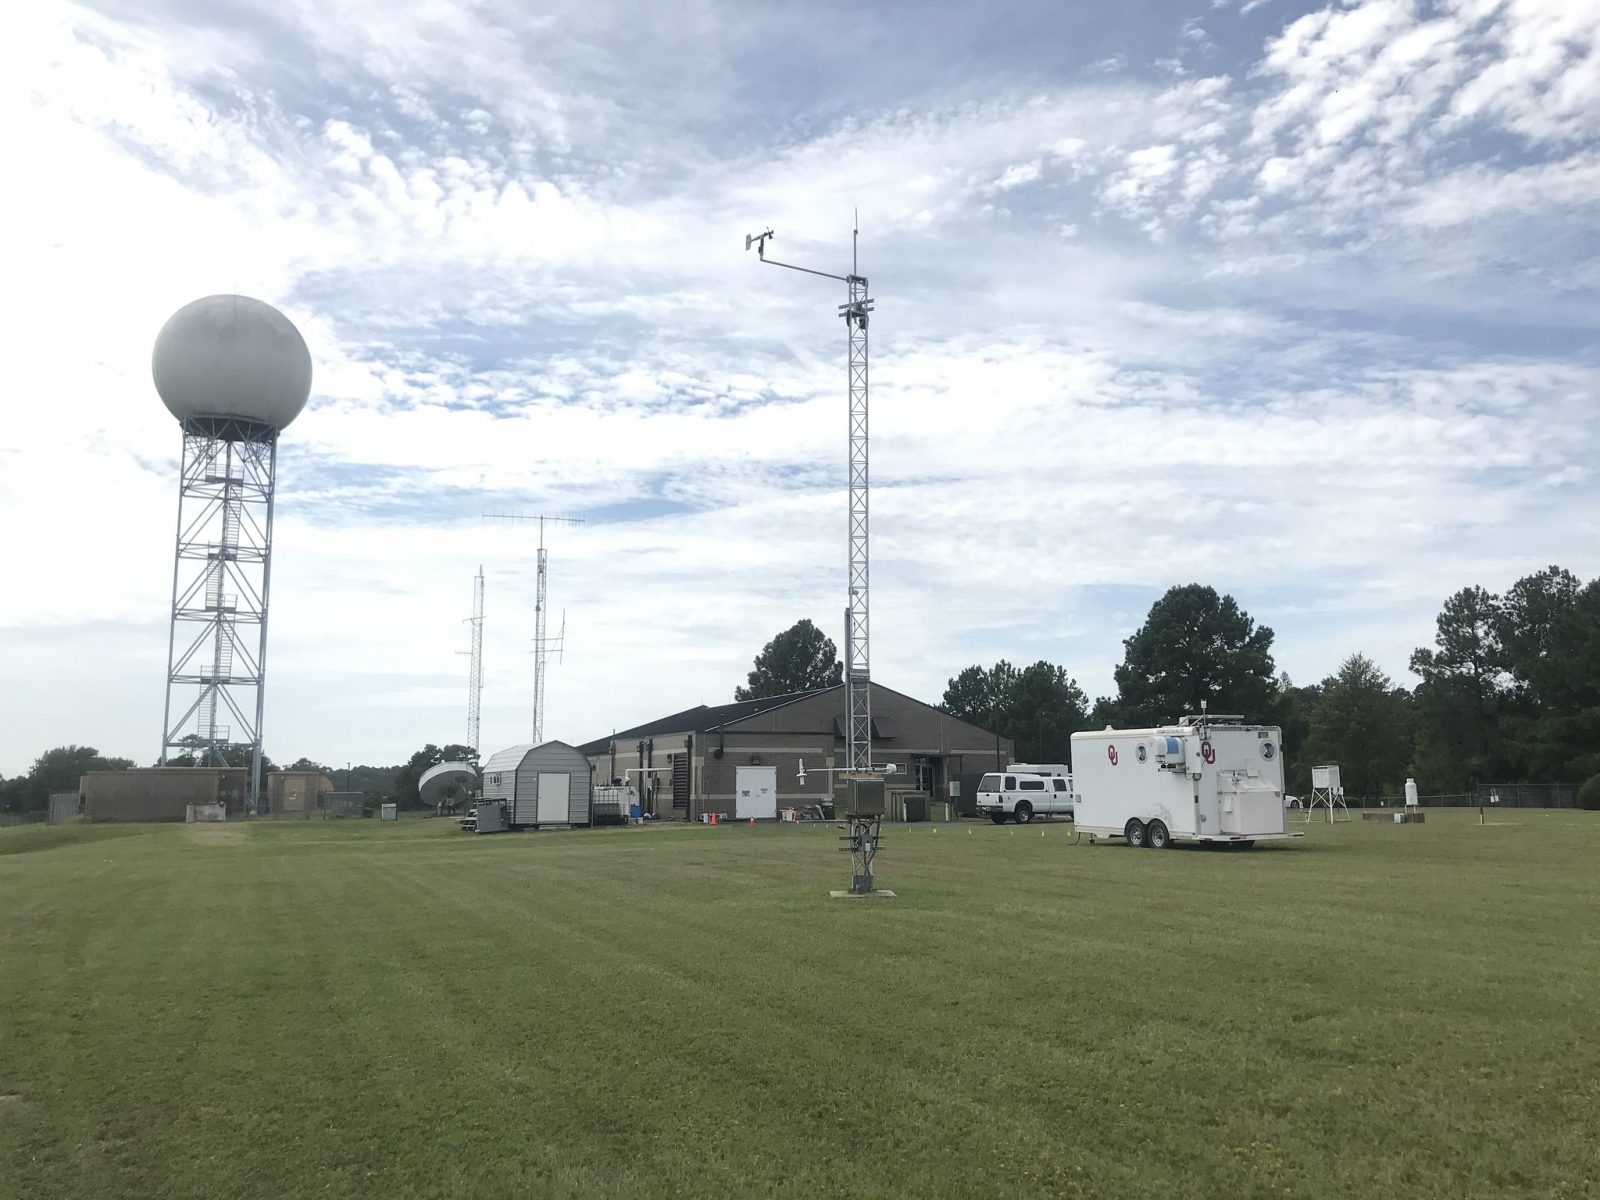 The CLAMPS trailer in Shreveport, Louisiana at the NWS Forecast Office as part of an OU CIMMS and NOAA NSSL experiment. (Photo by Matthew Carney/OU)